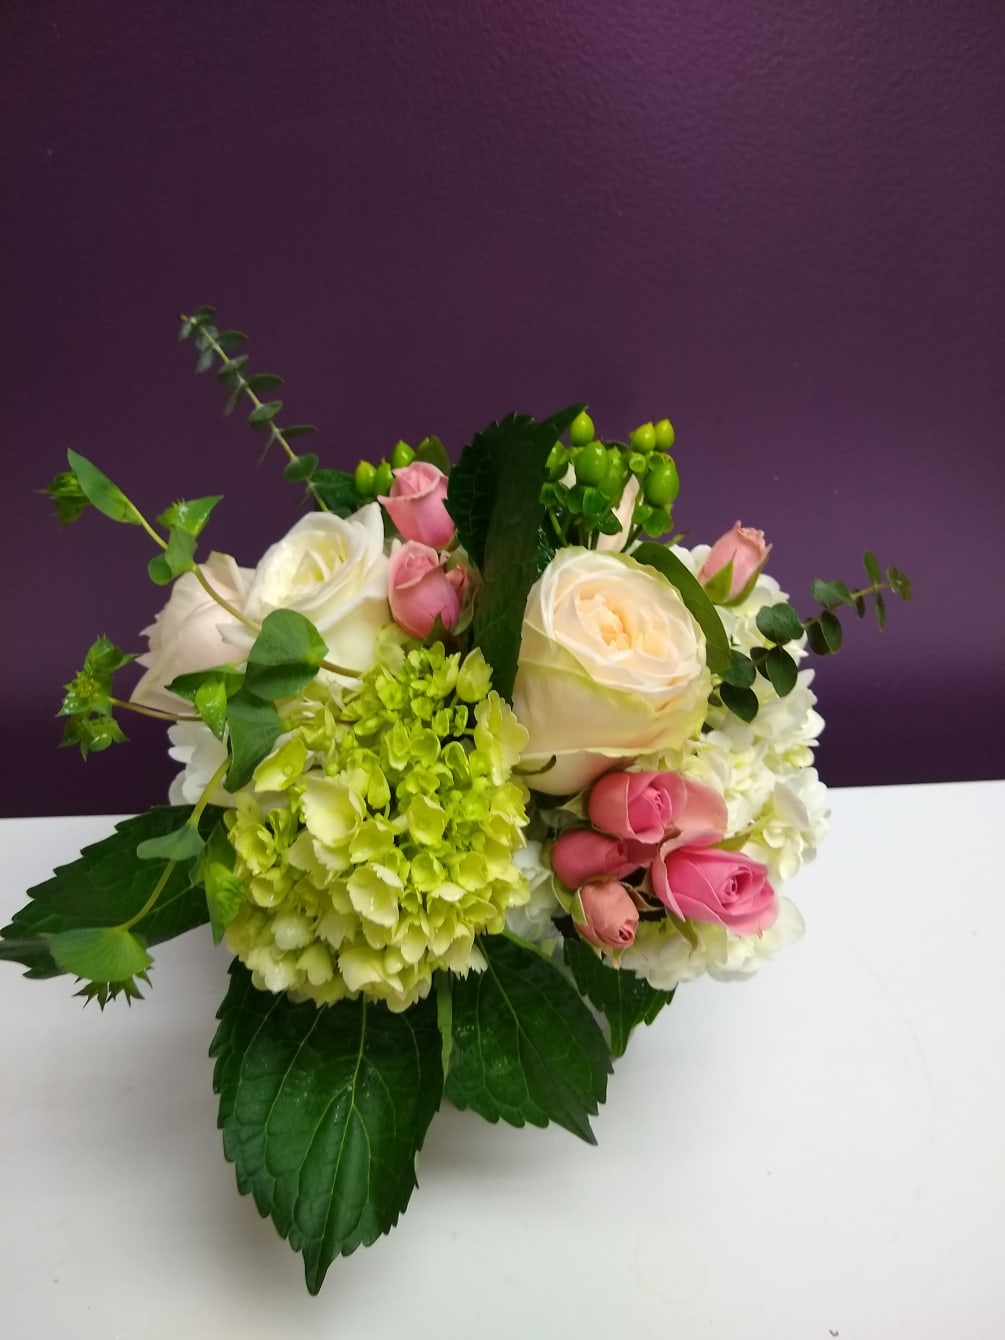 This bouquet graces every room with a touch of elegance.